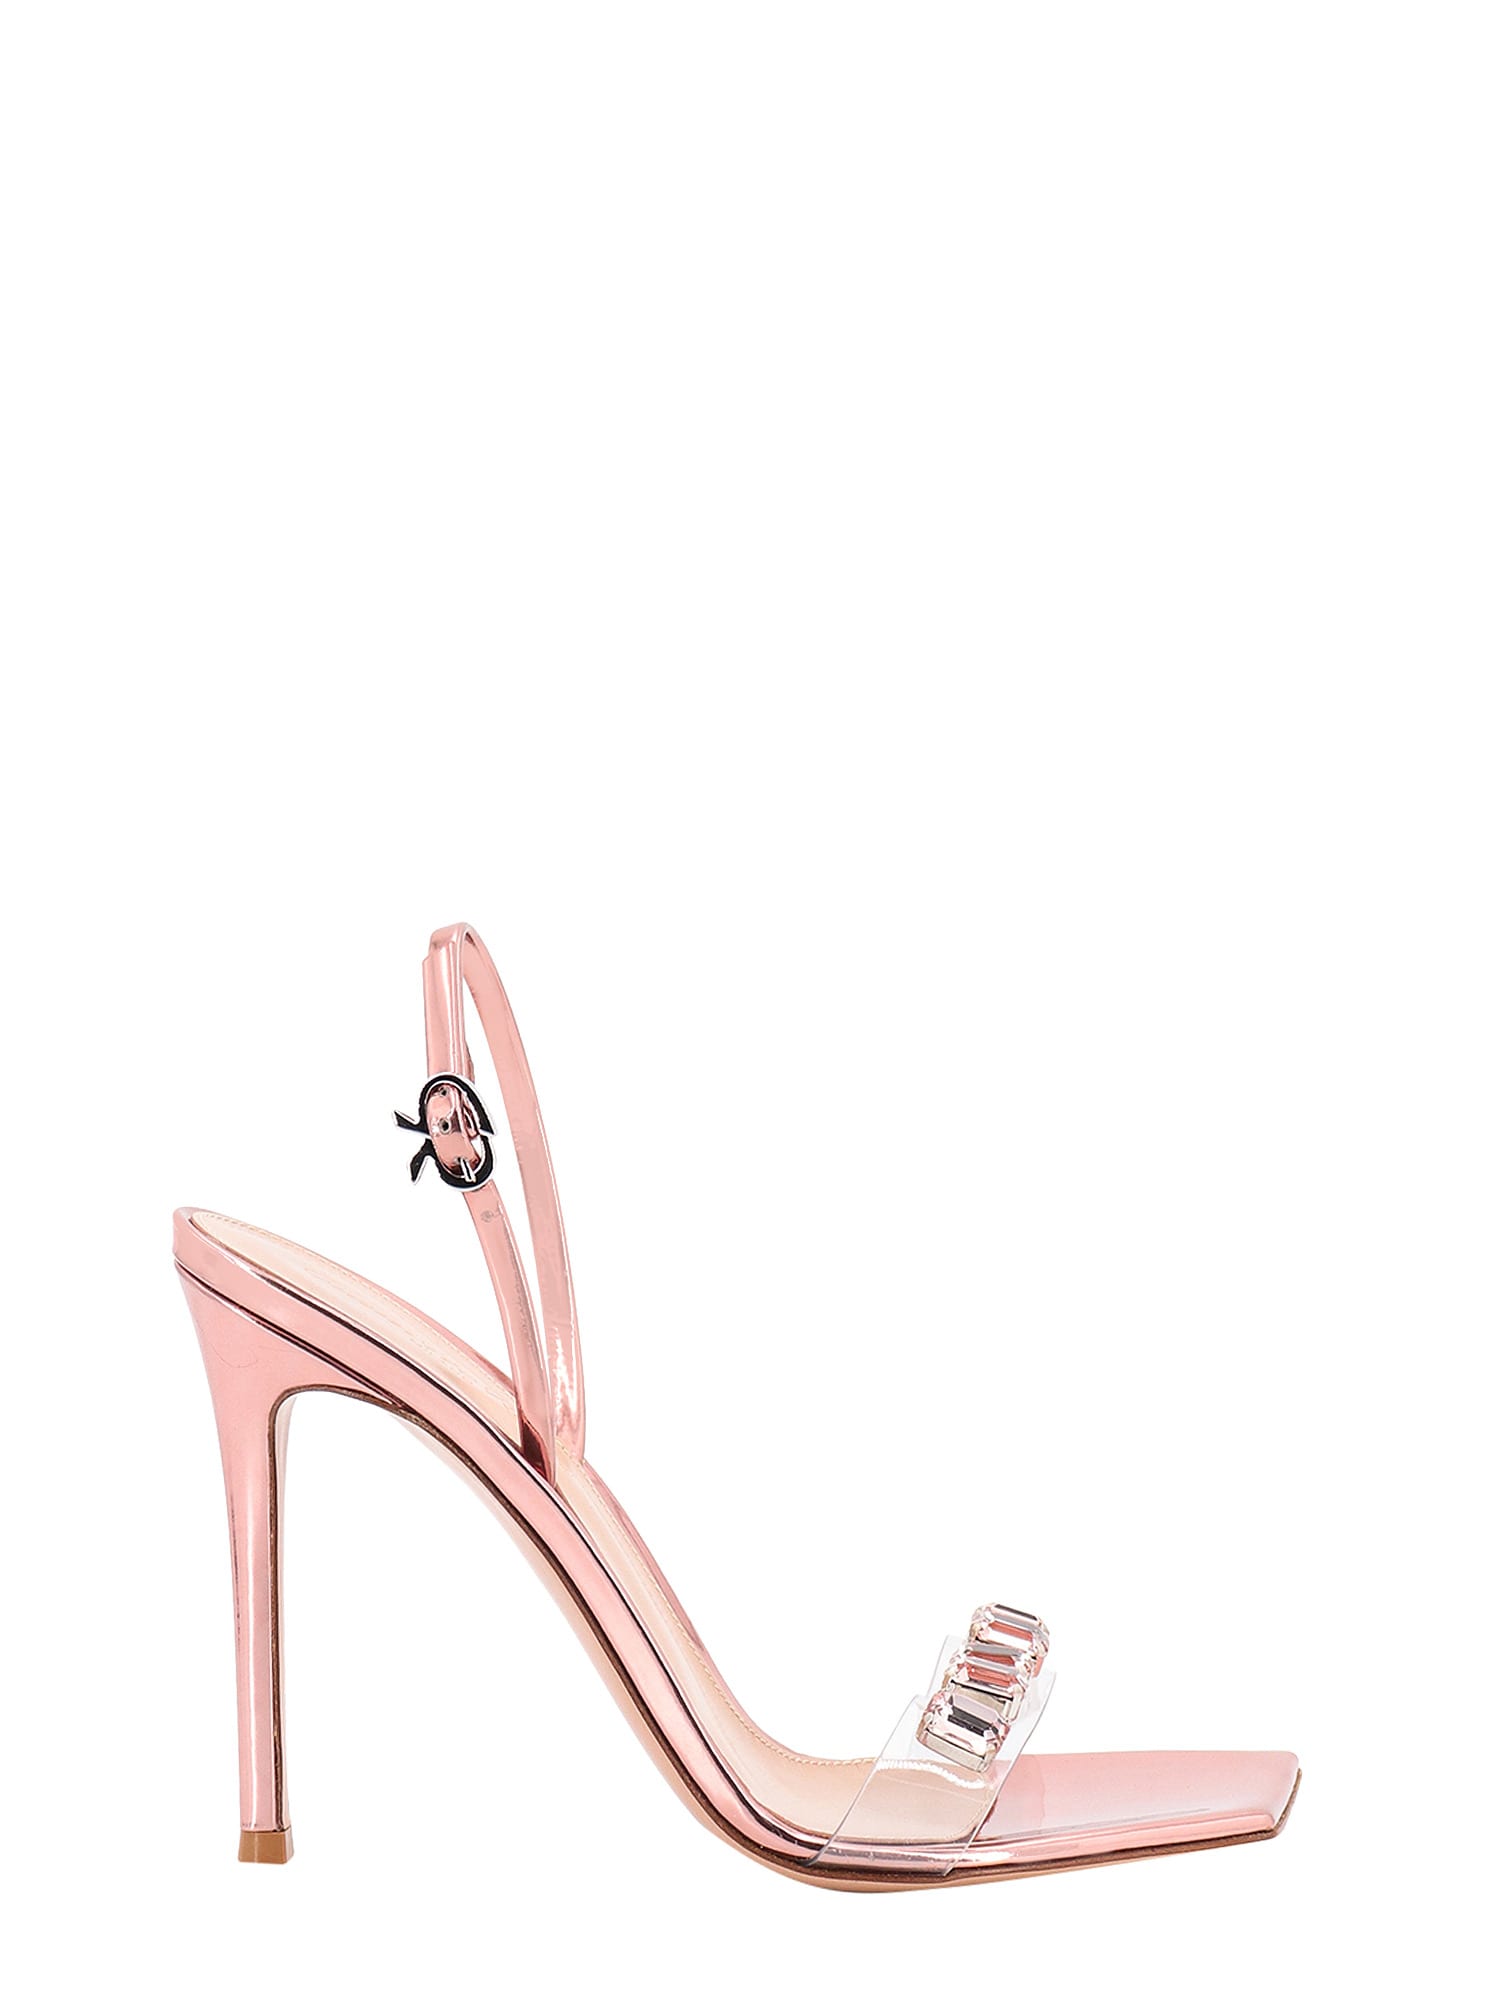 GIANVITO ROSSI RIBBON CANDY SANDALS